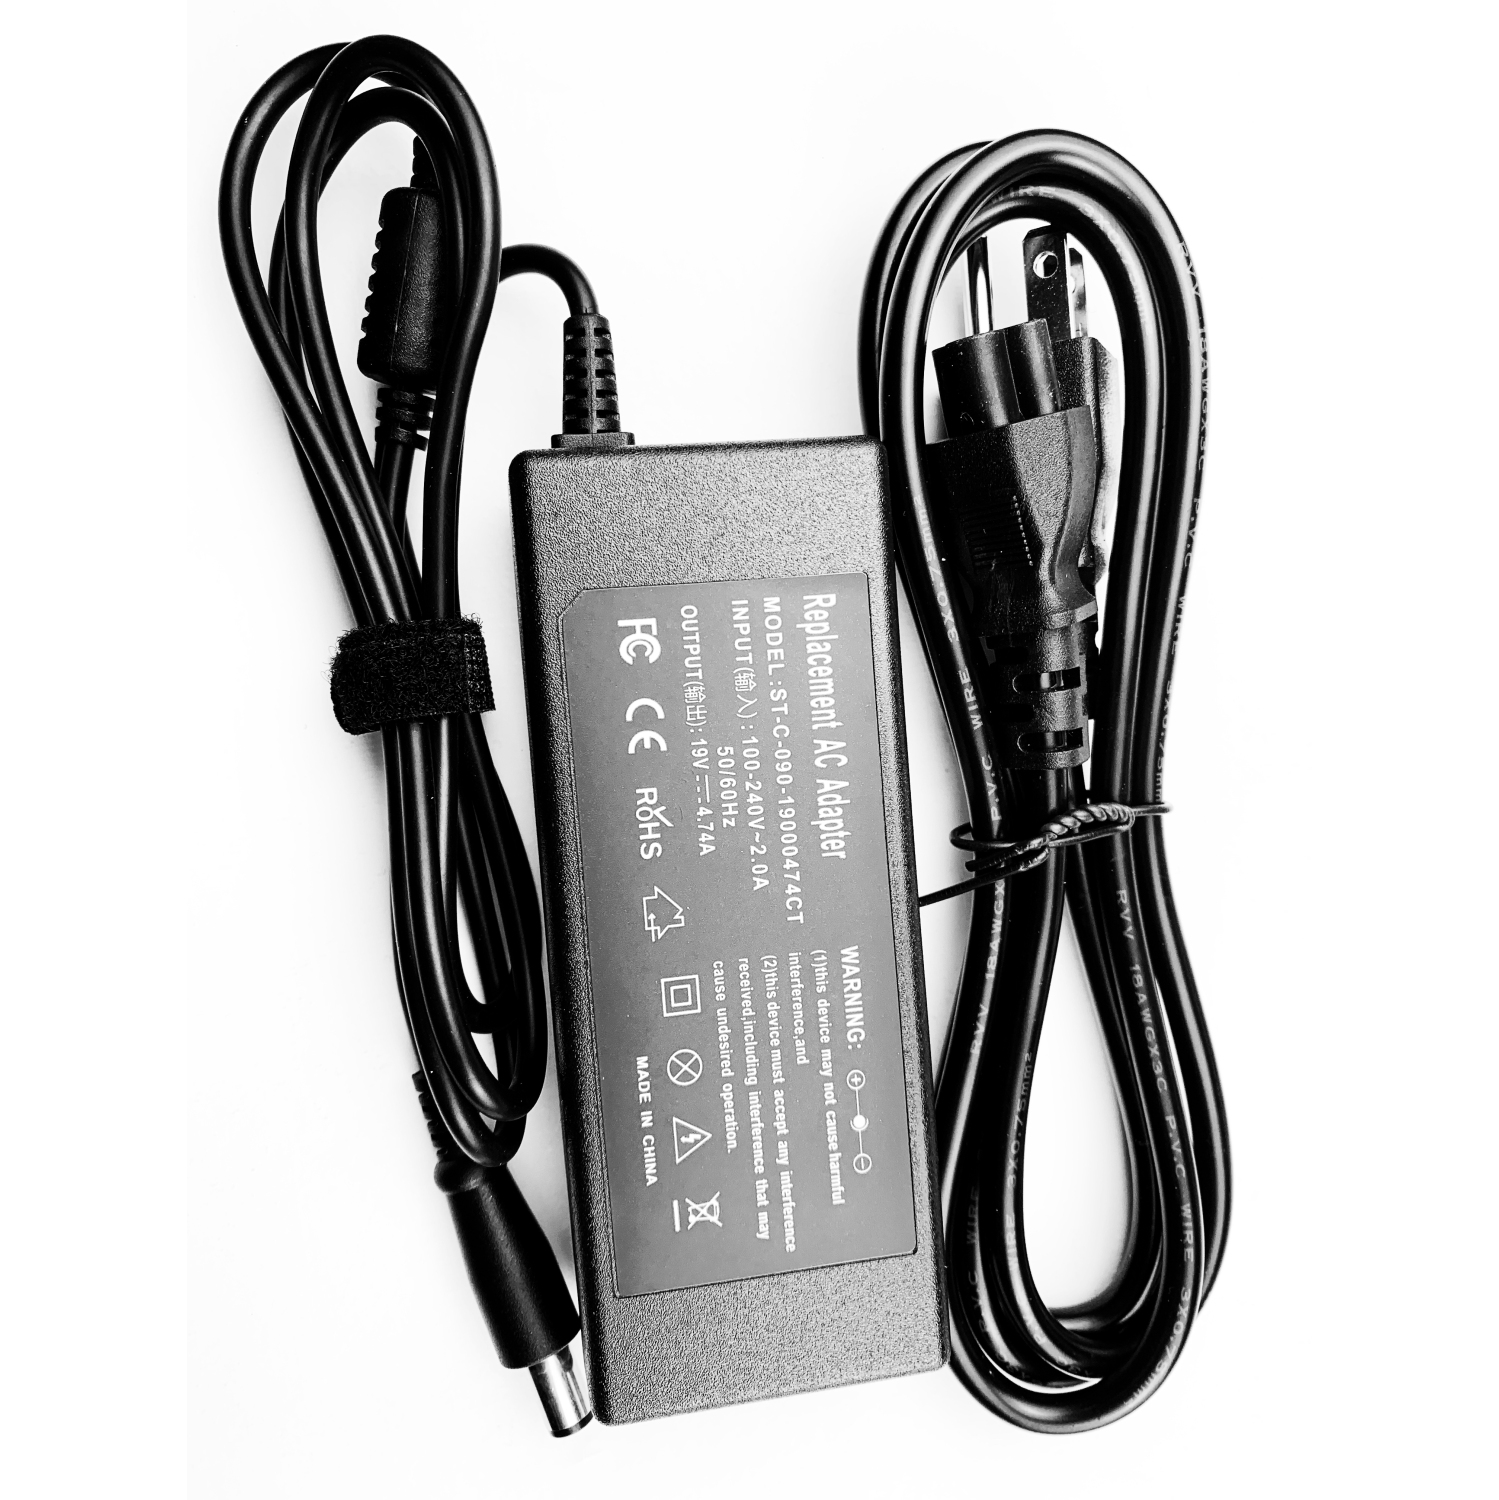 3.5A / 4.74A Max 90W AC adapter charger for HP Pavilion DV5-5200 DV6 Probook 430 G1 440 G2 450 G2 NEW